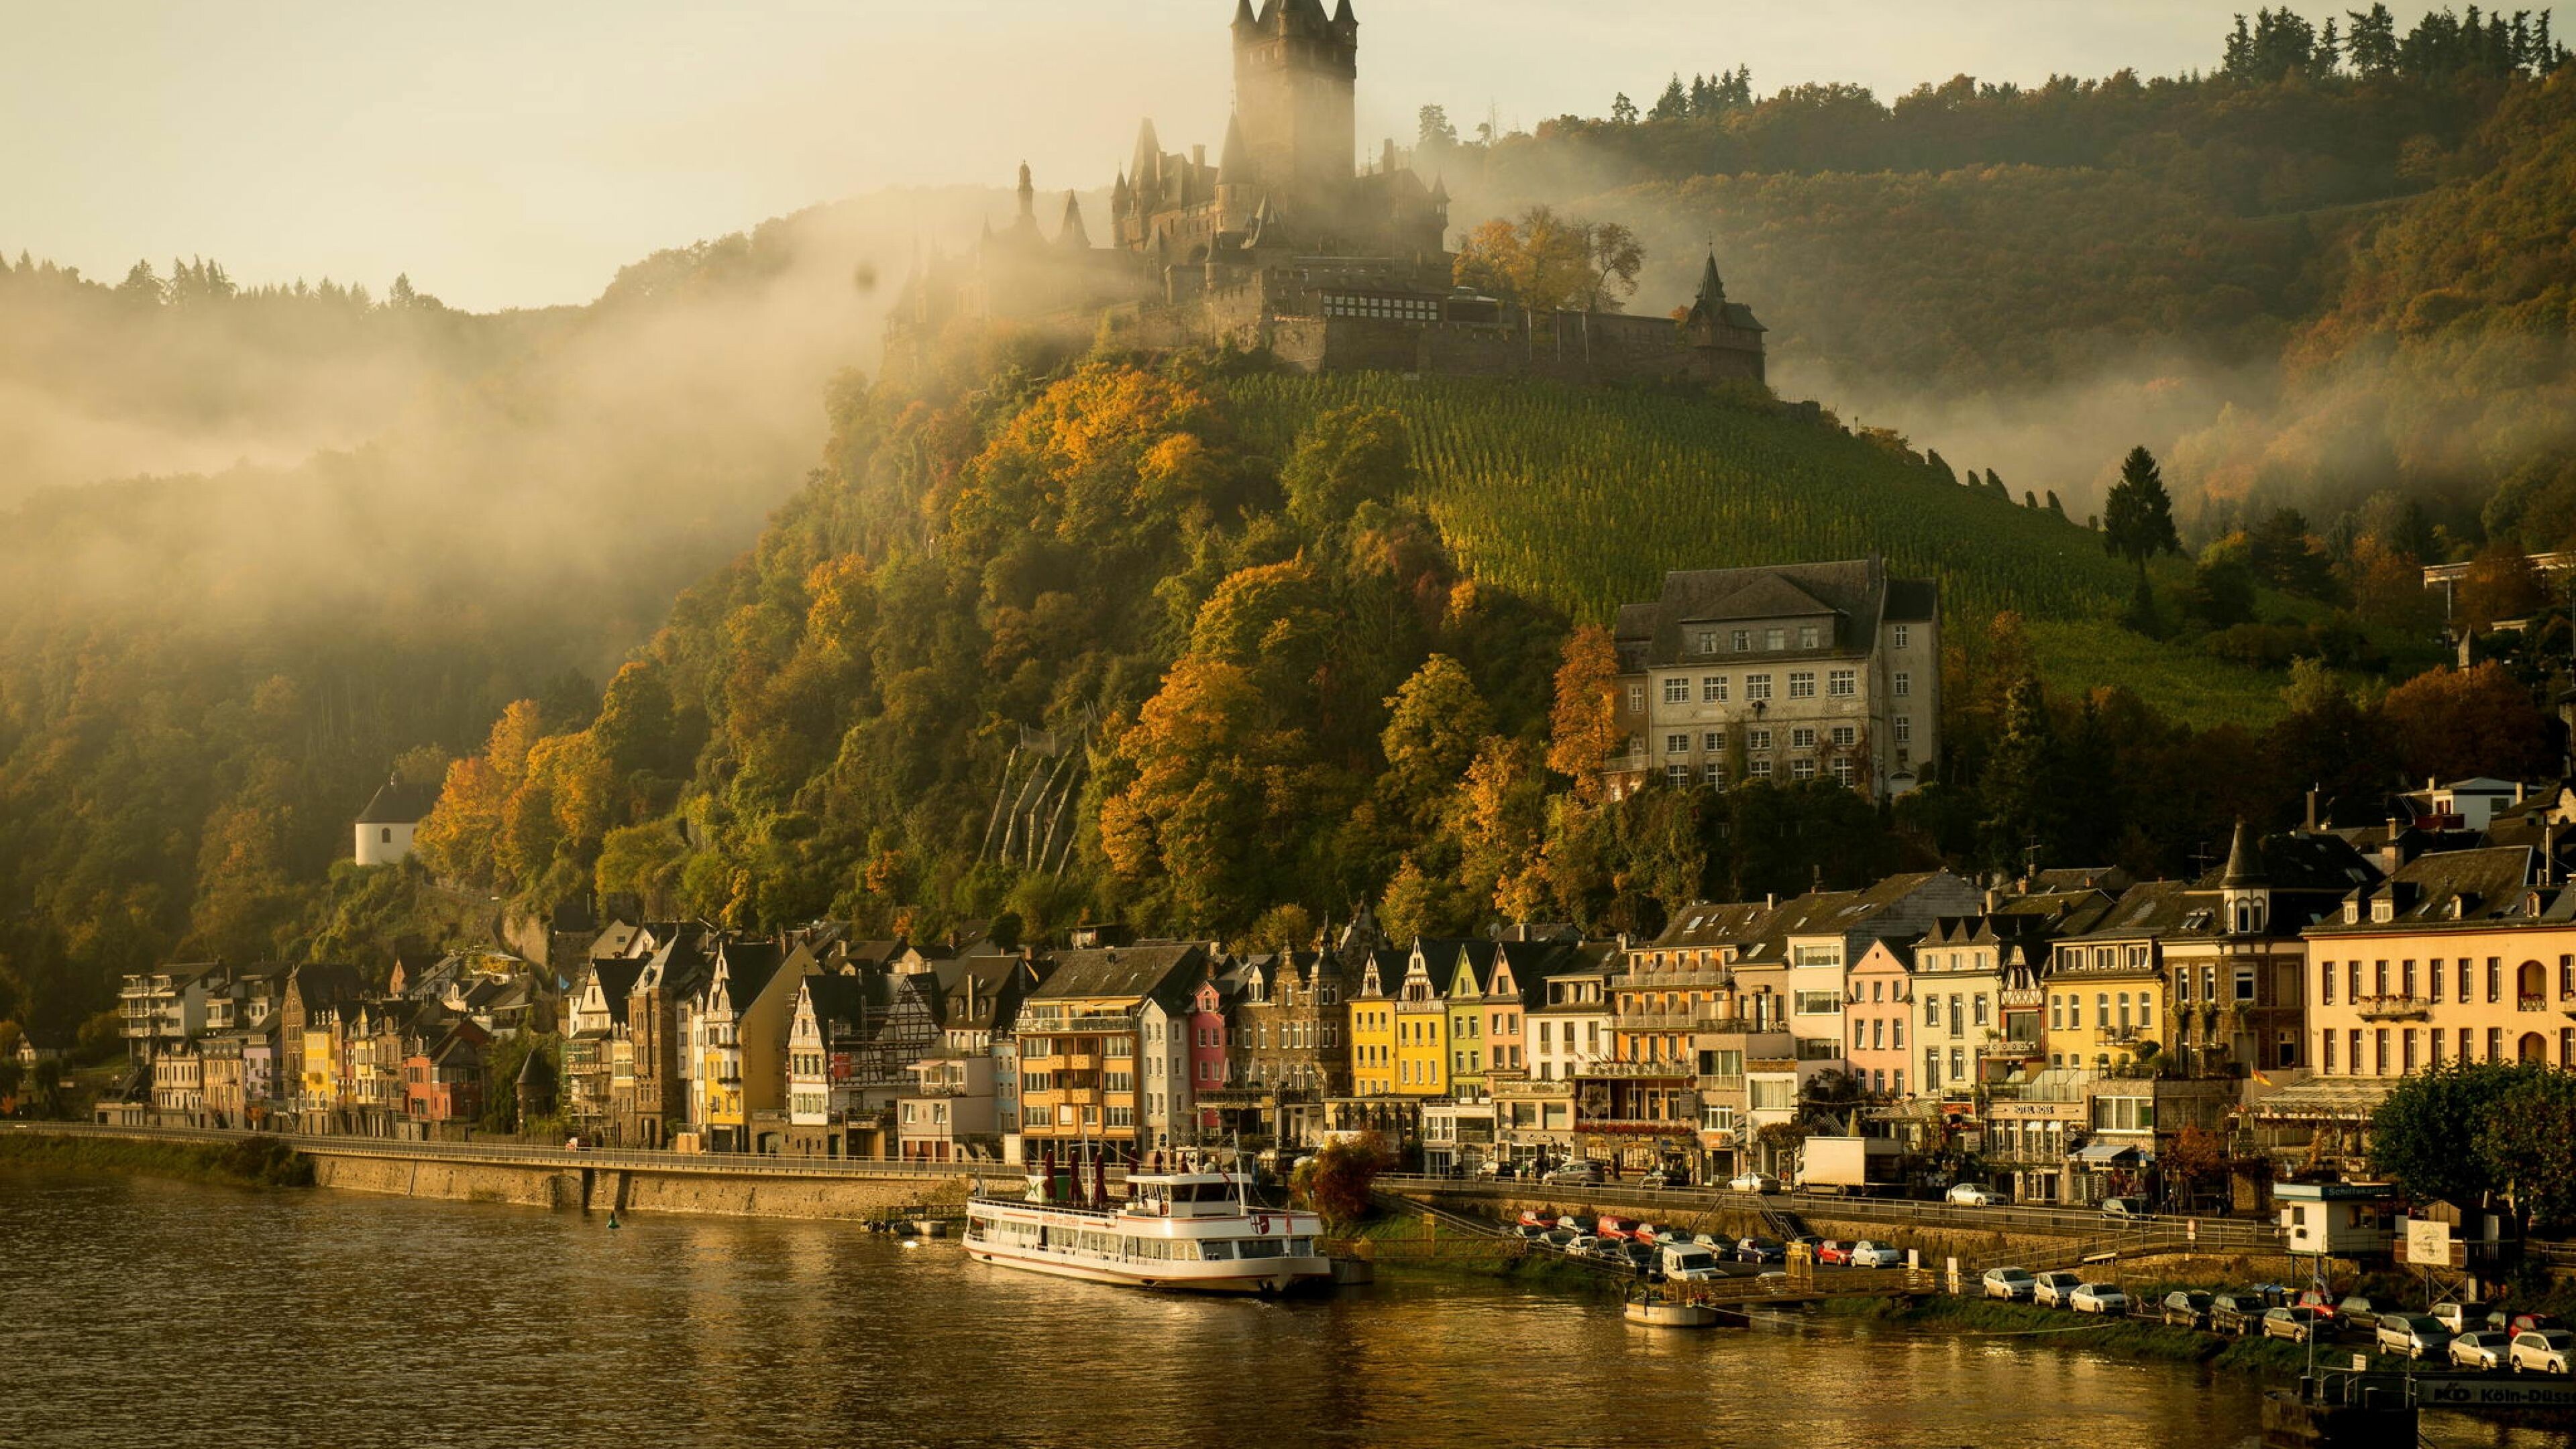 Germany: Cochem Castle, A country in Central Europe, Townscape. 3840x2160 4K Wallpaper.